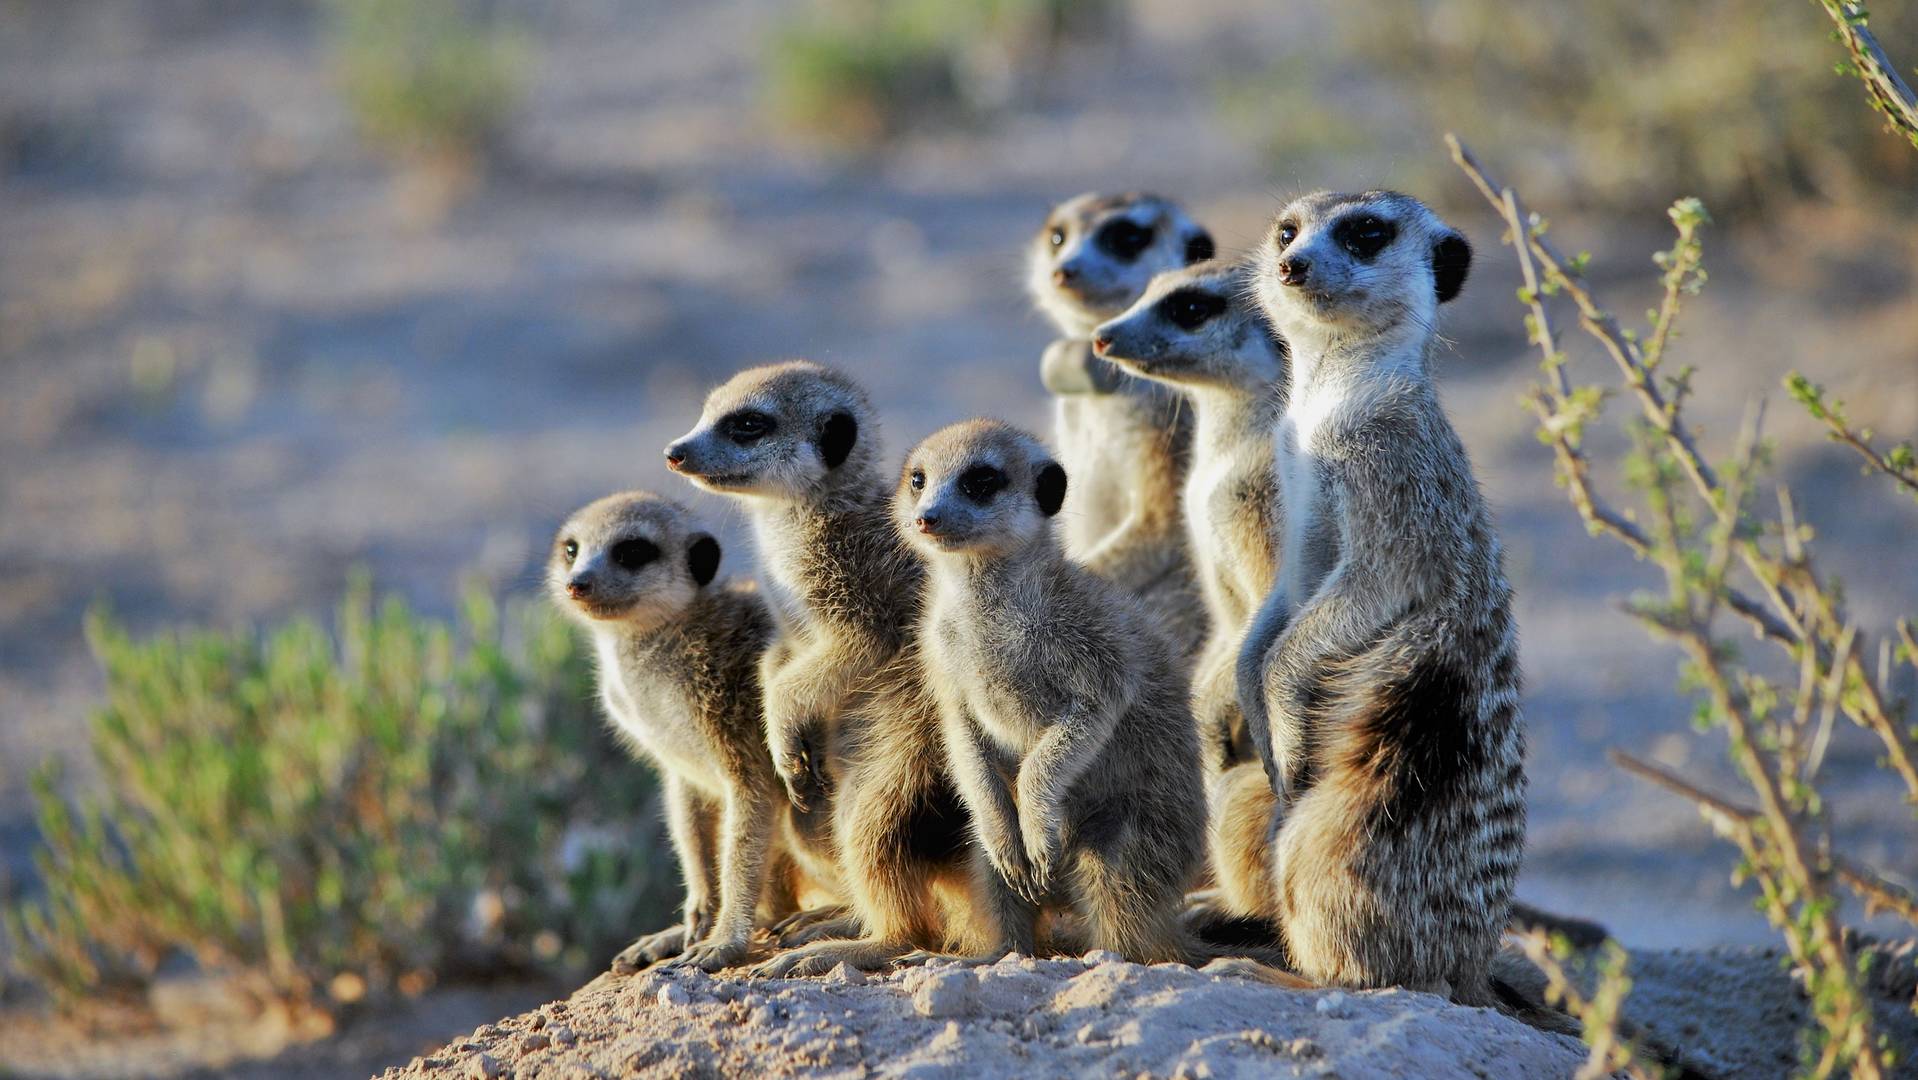 A photograph showing a group of meerkats.